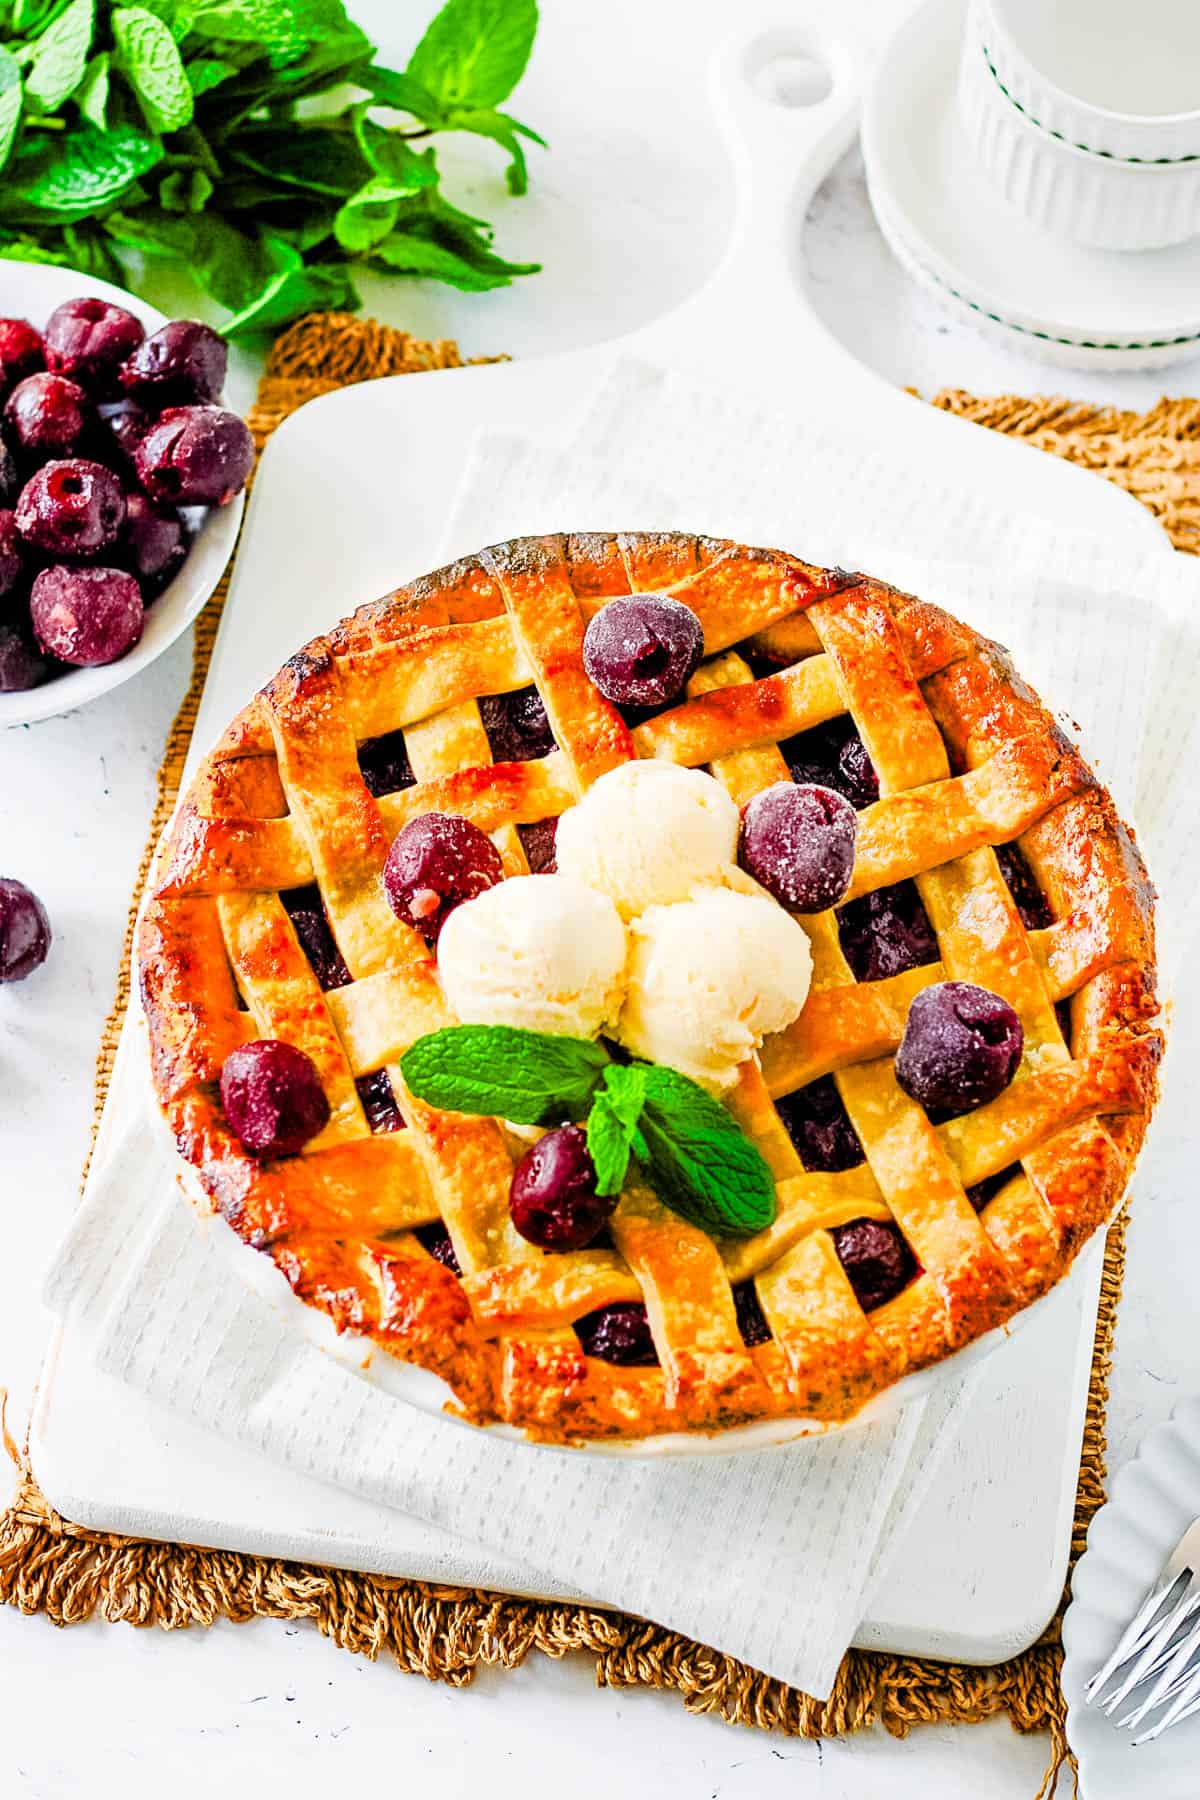 Cherry pie with frozen cherries on a white cutting board, topped with ice cream and garnished with mint.